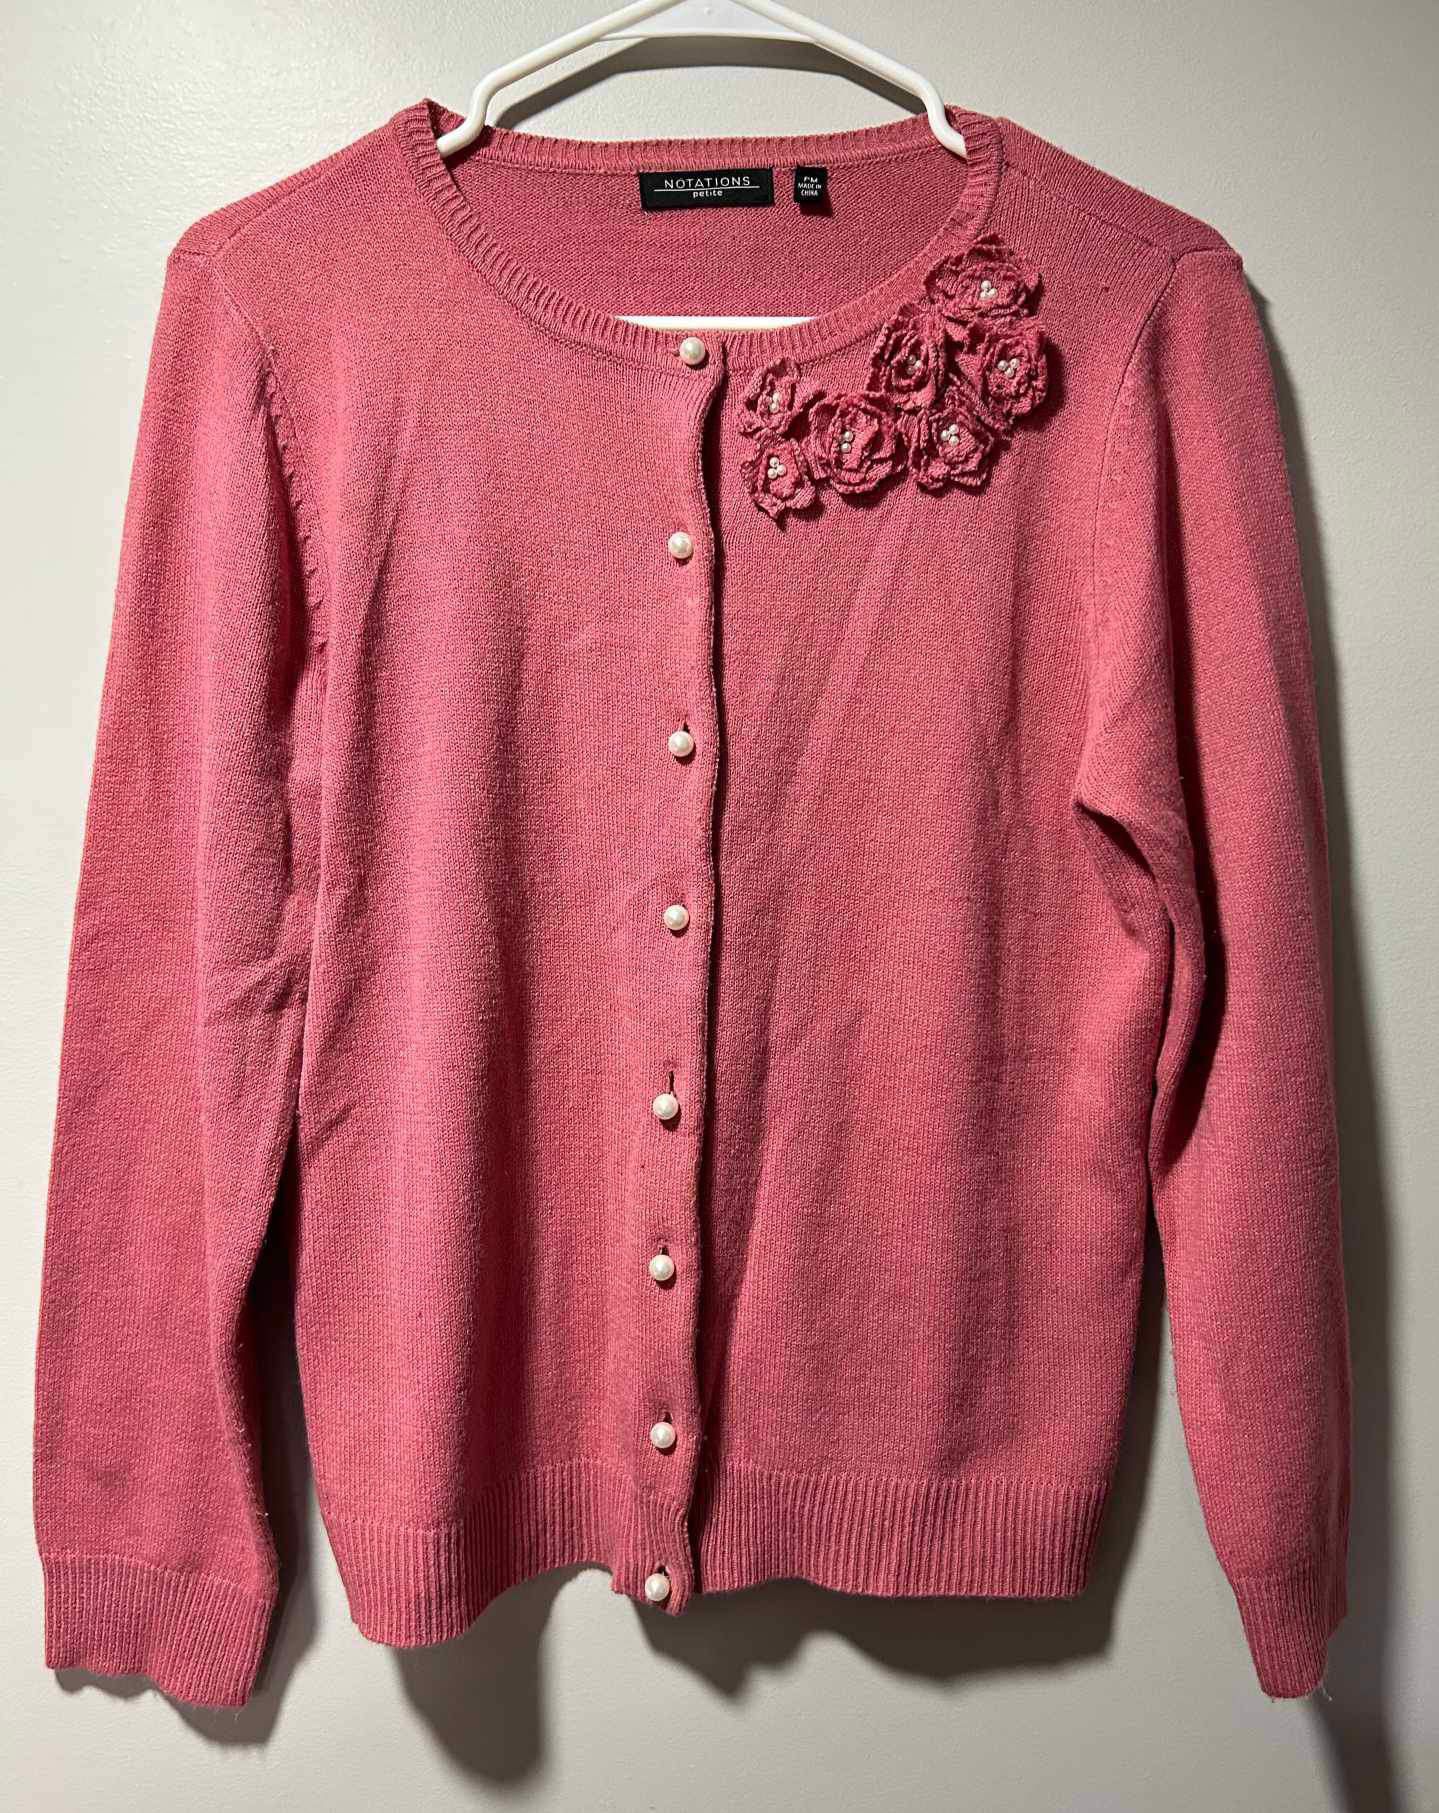 Notations Petite Pink Cardigan Sweater Pearl Buttons Flowers Womens Medium 